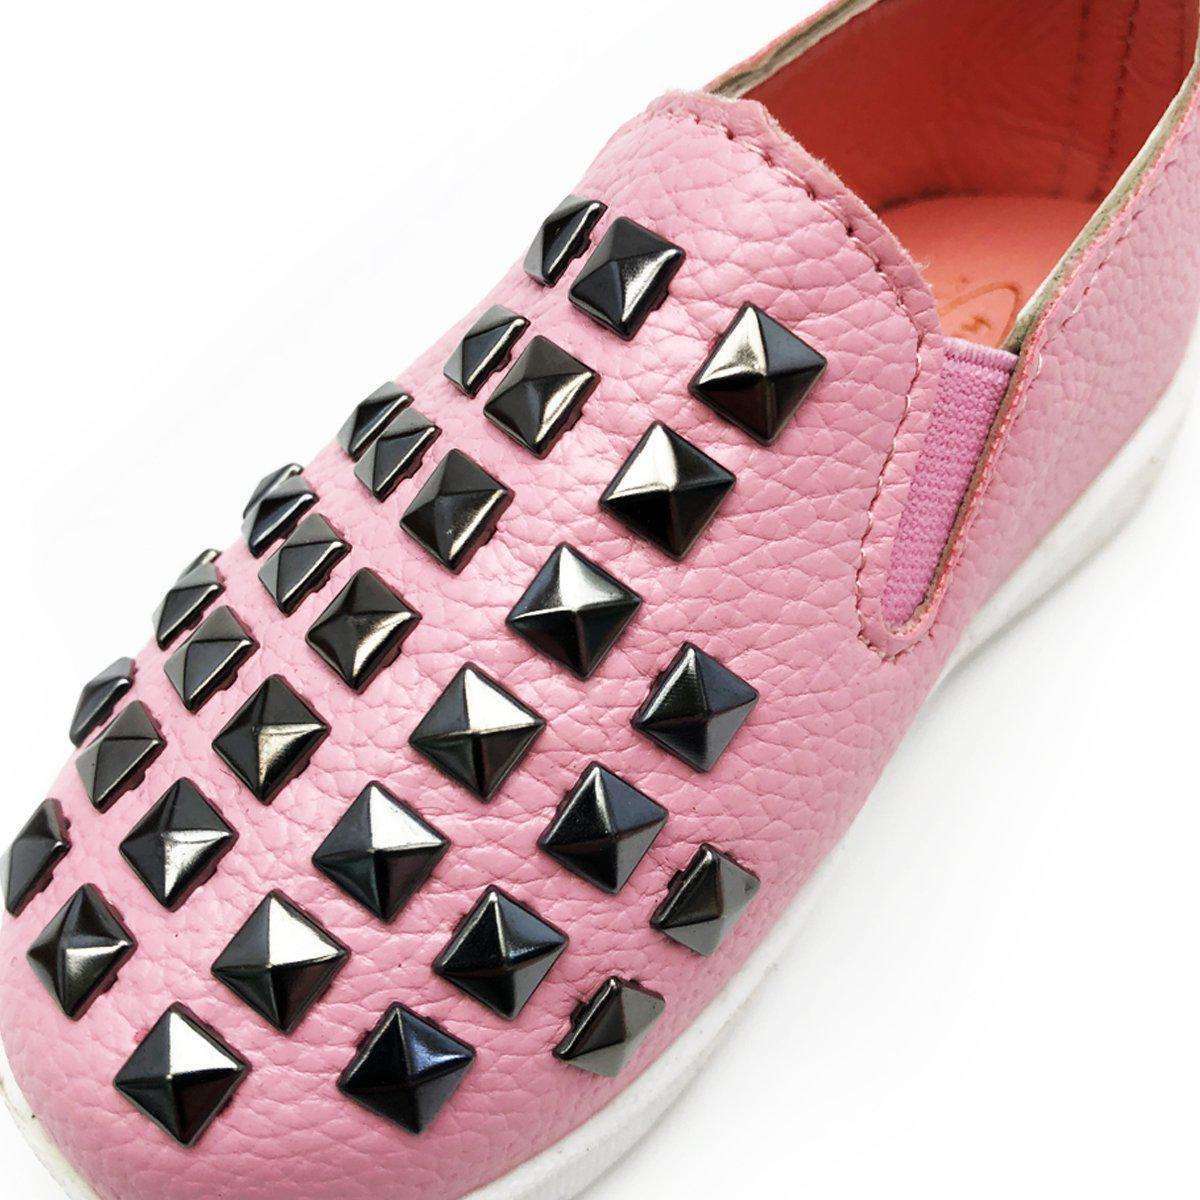 Kids pink stud faux leather shoes detail